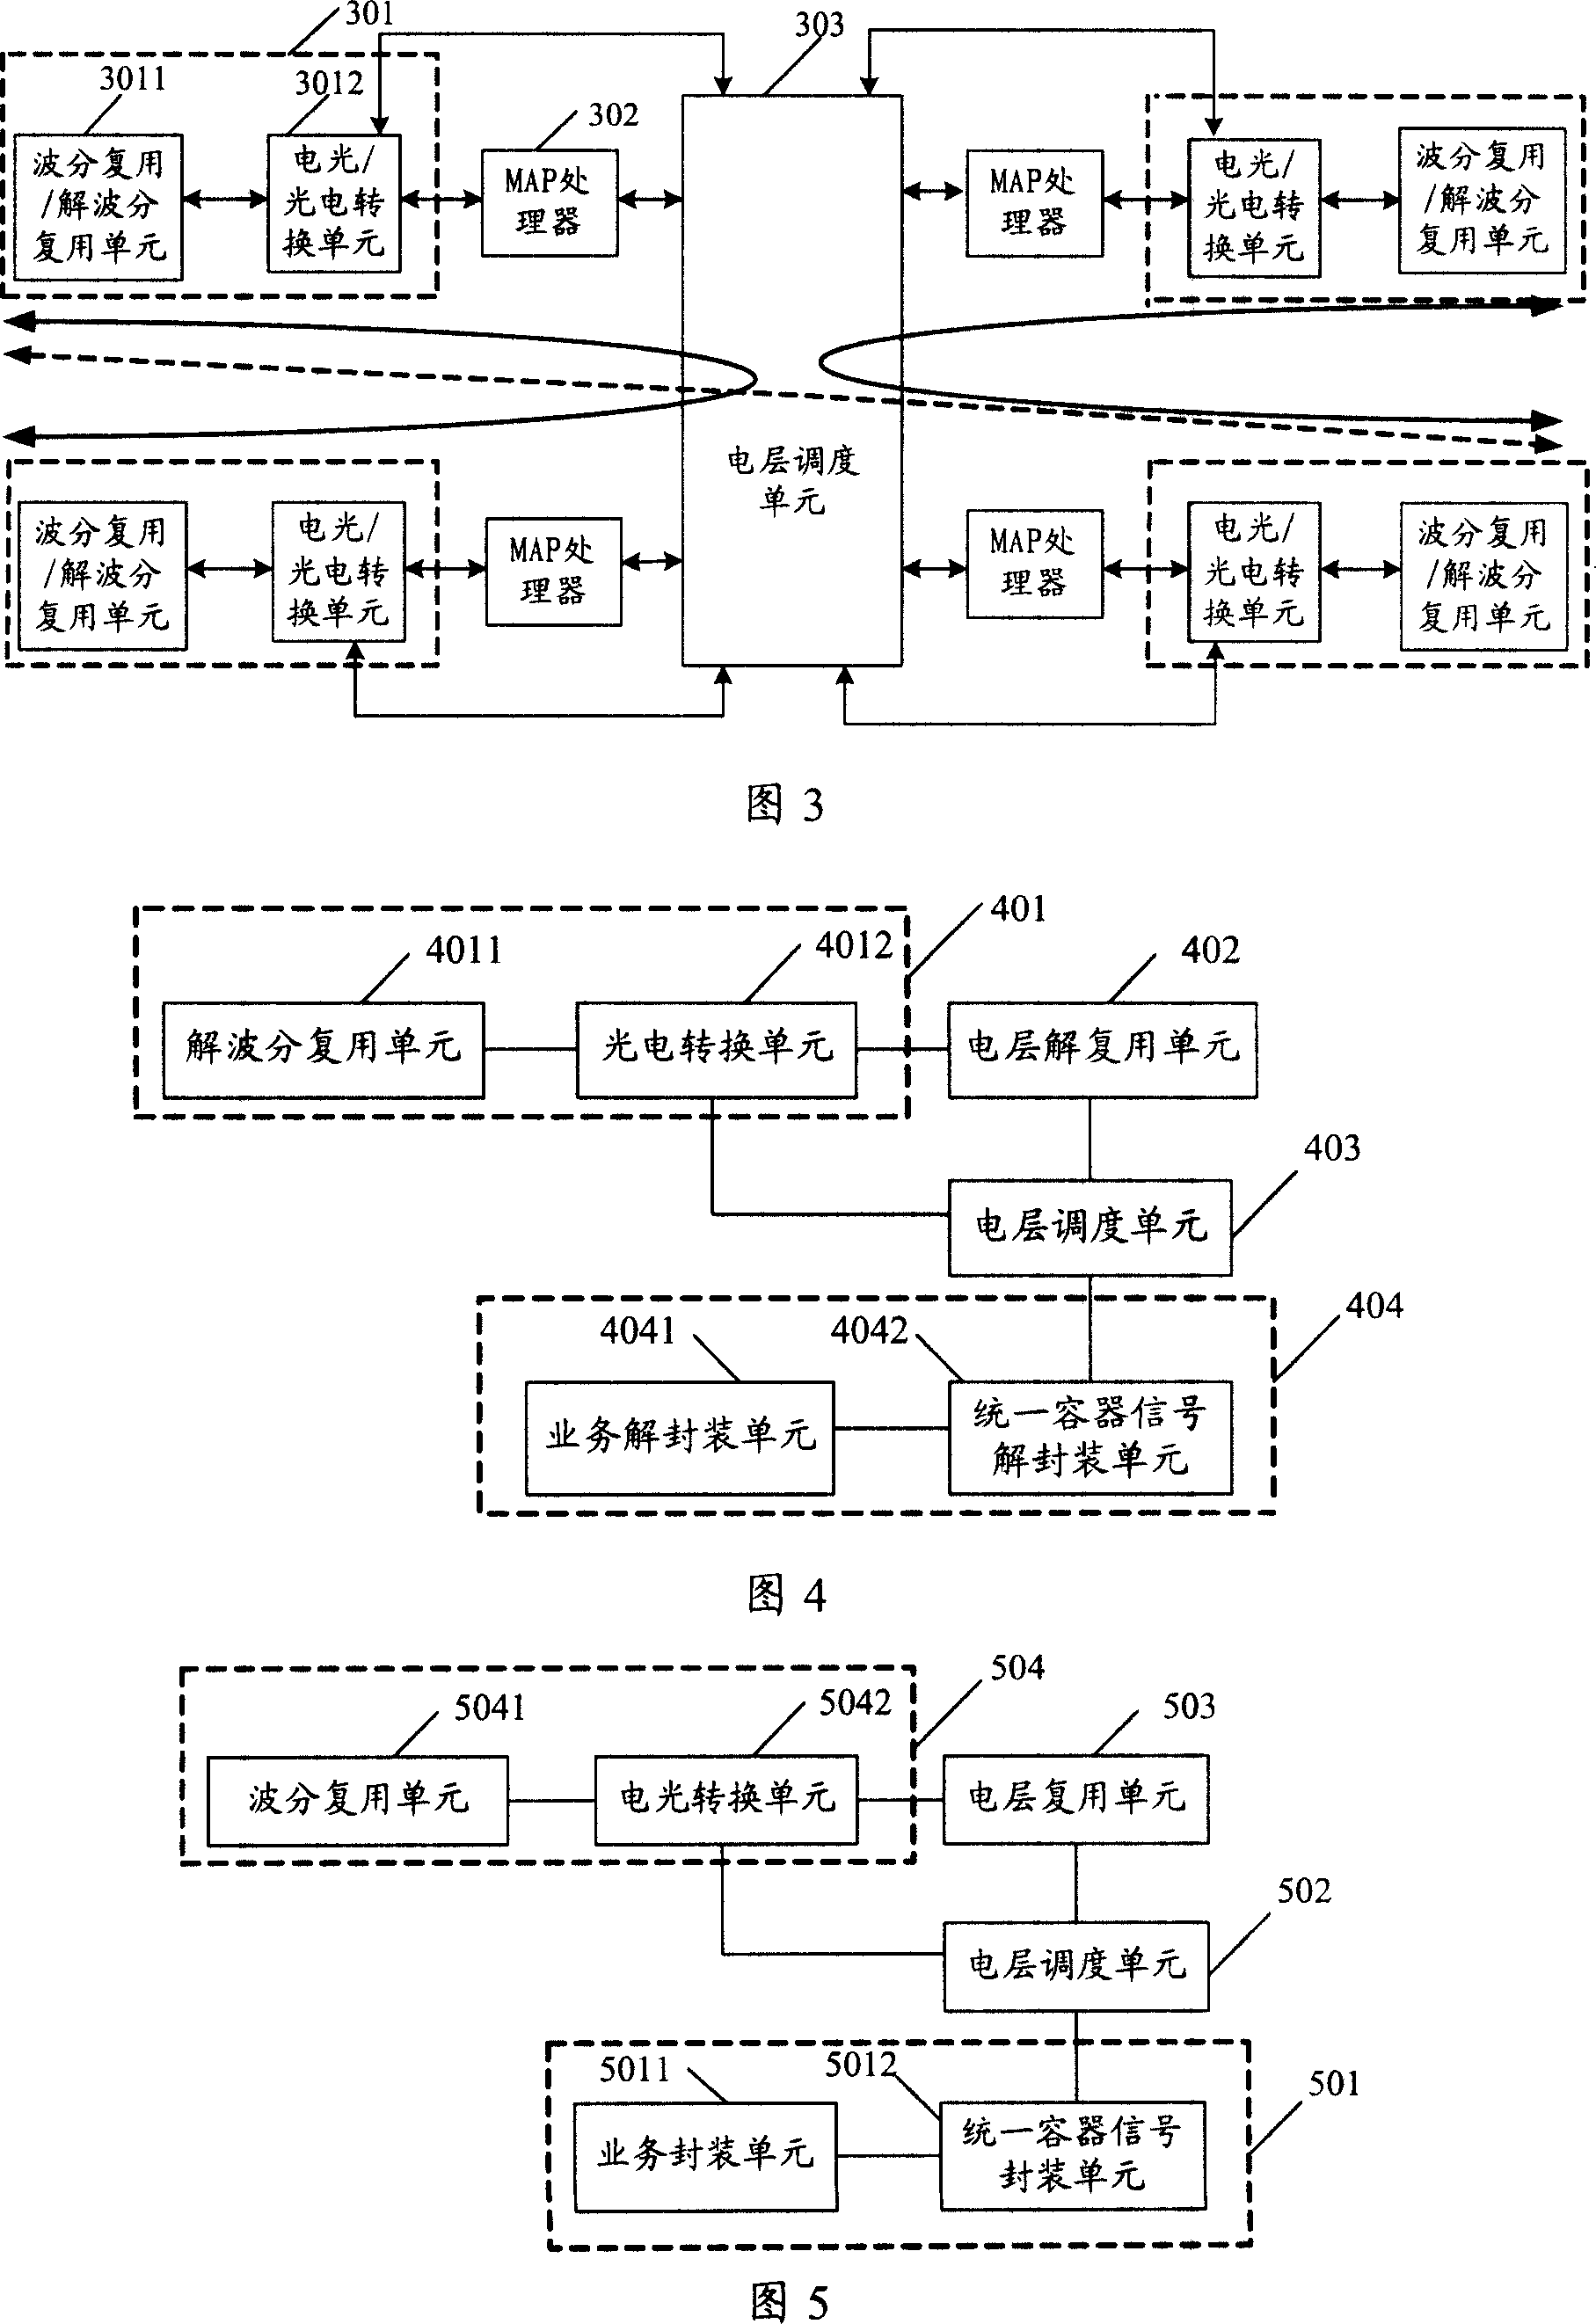 Dispatching device and method in optical communication network